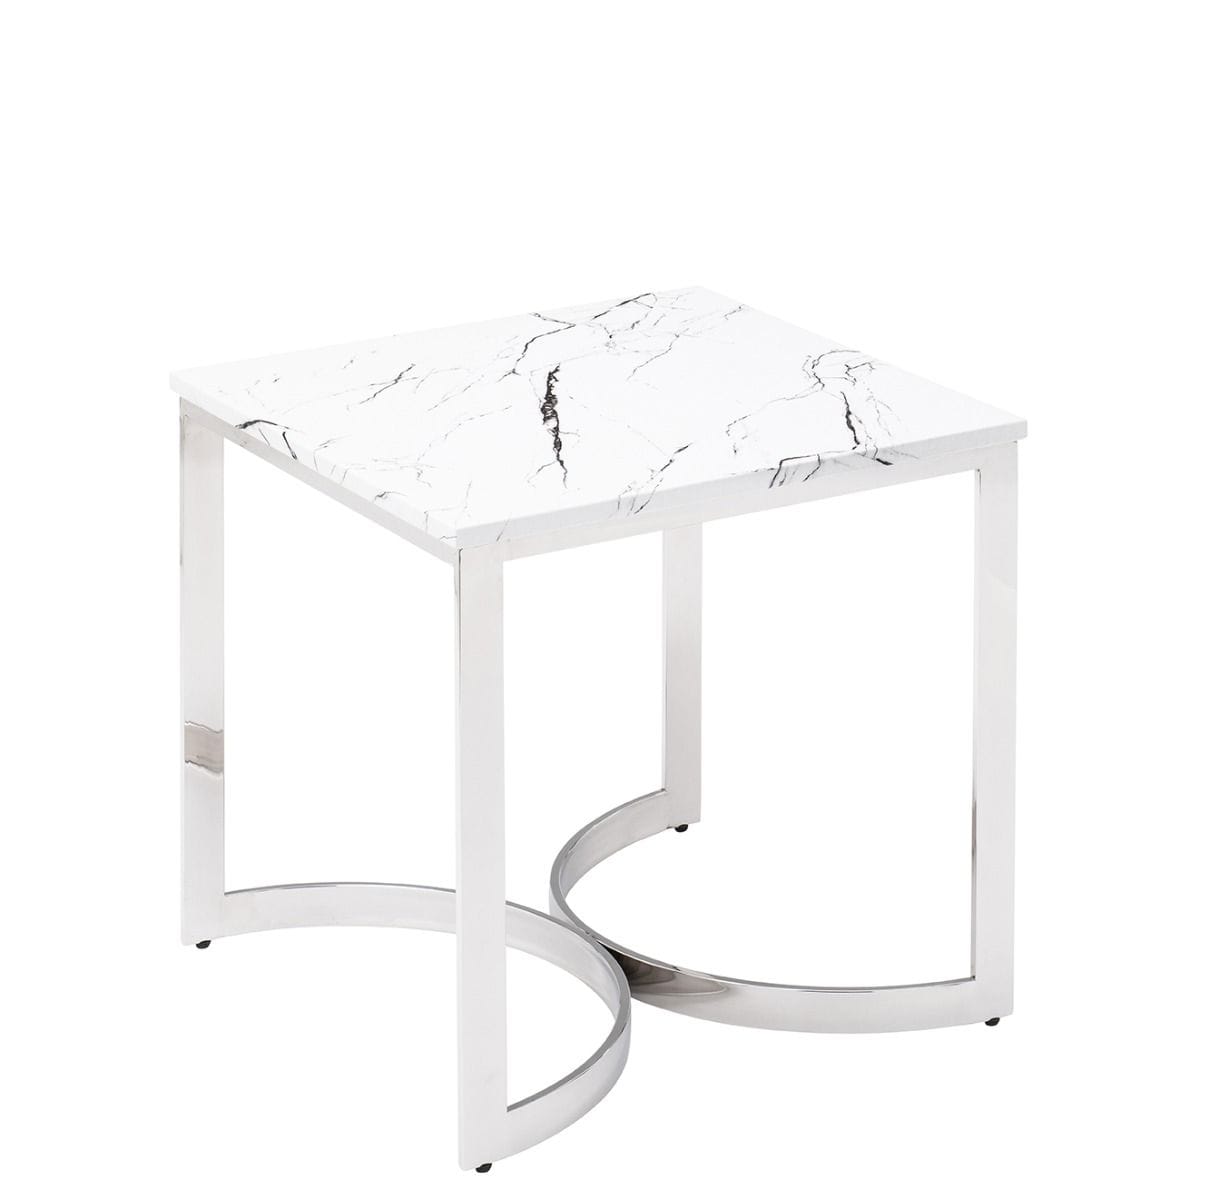 DERRYS Table ///FLOOR STOCK CLEARANCE/// - Ritz Side/Lamp Table